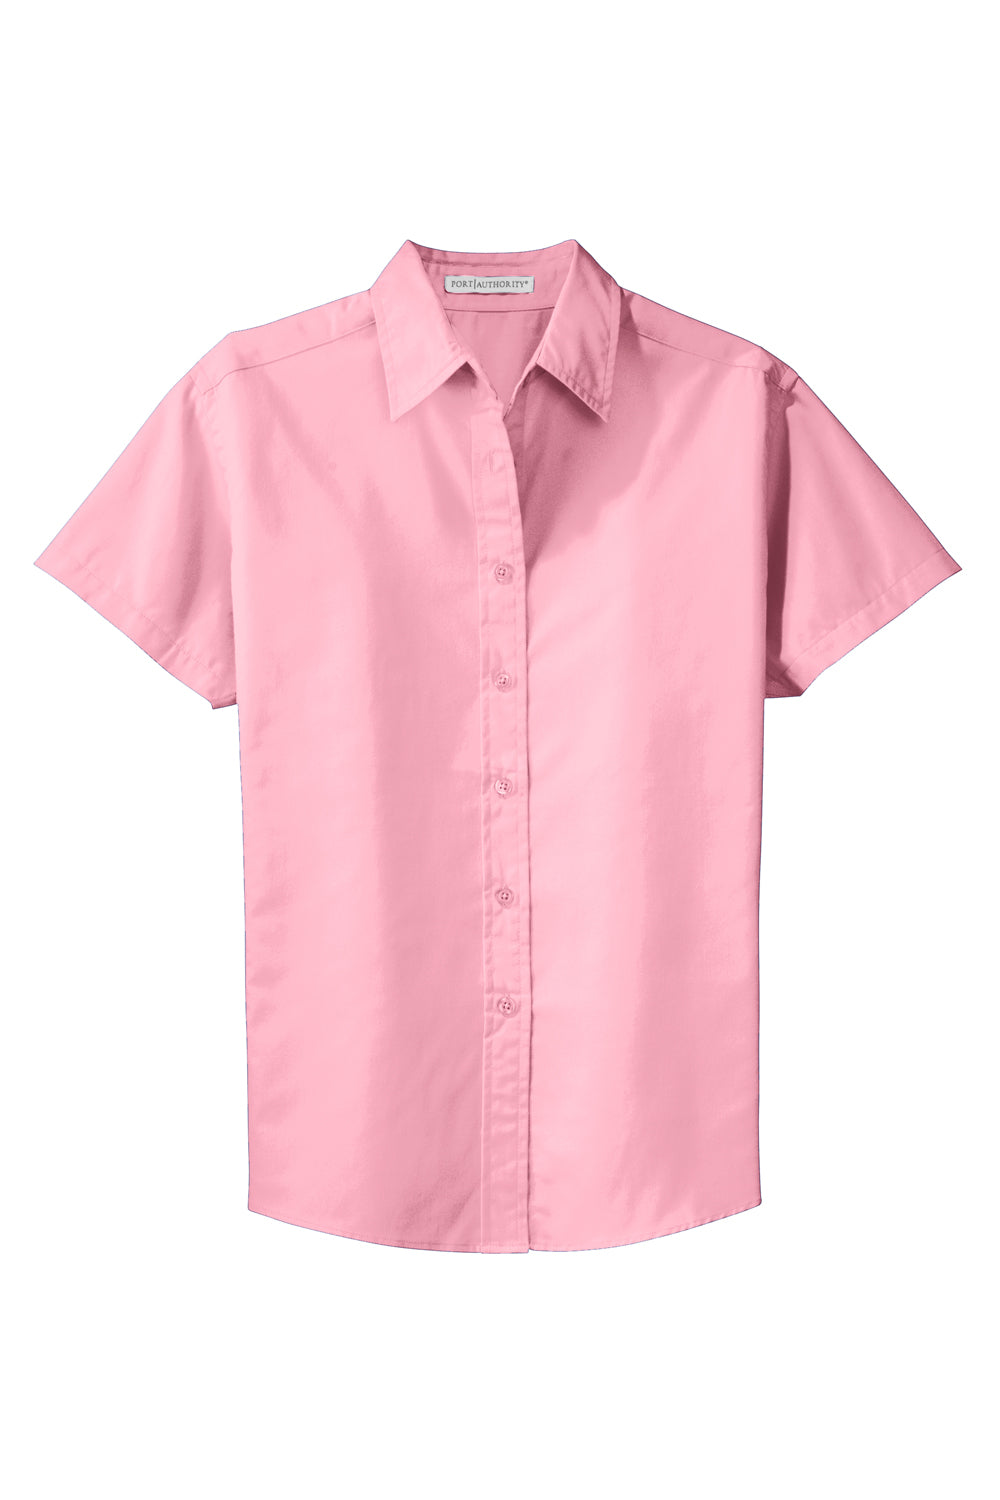 Port Authority L508 Womens Easy Care Wrinkle Resistant Short Sleeve Button Down Shirt Light Pink Flat Front